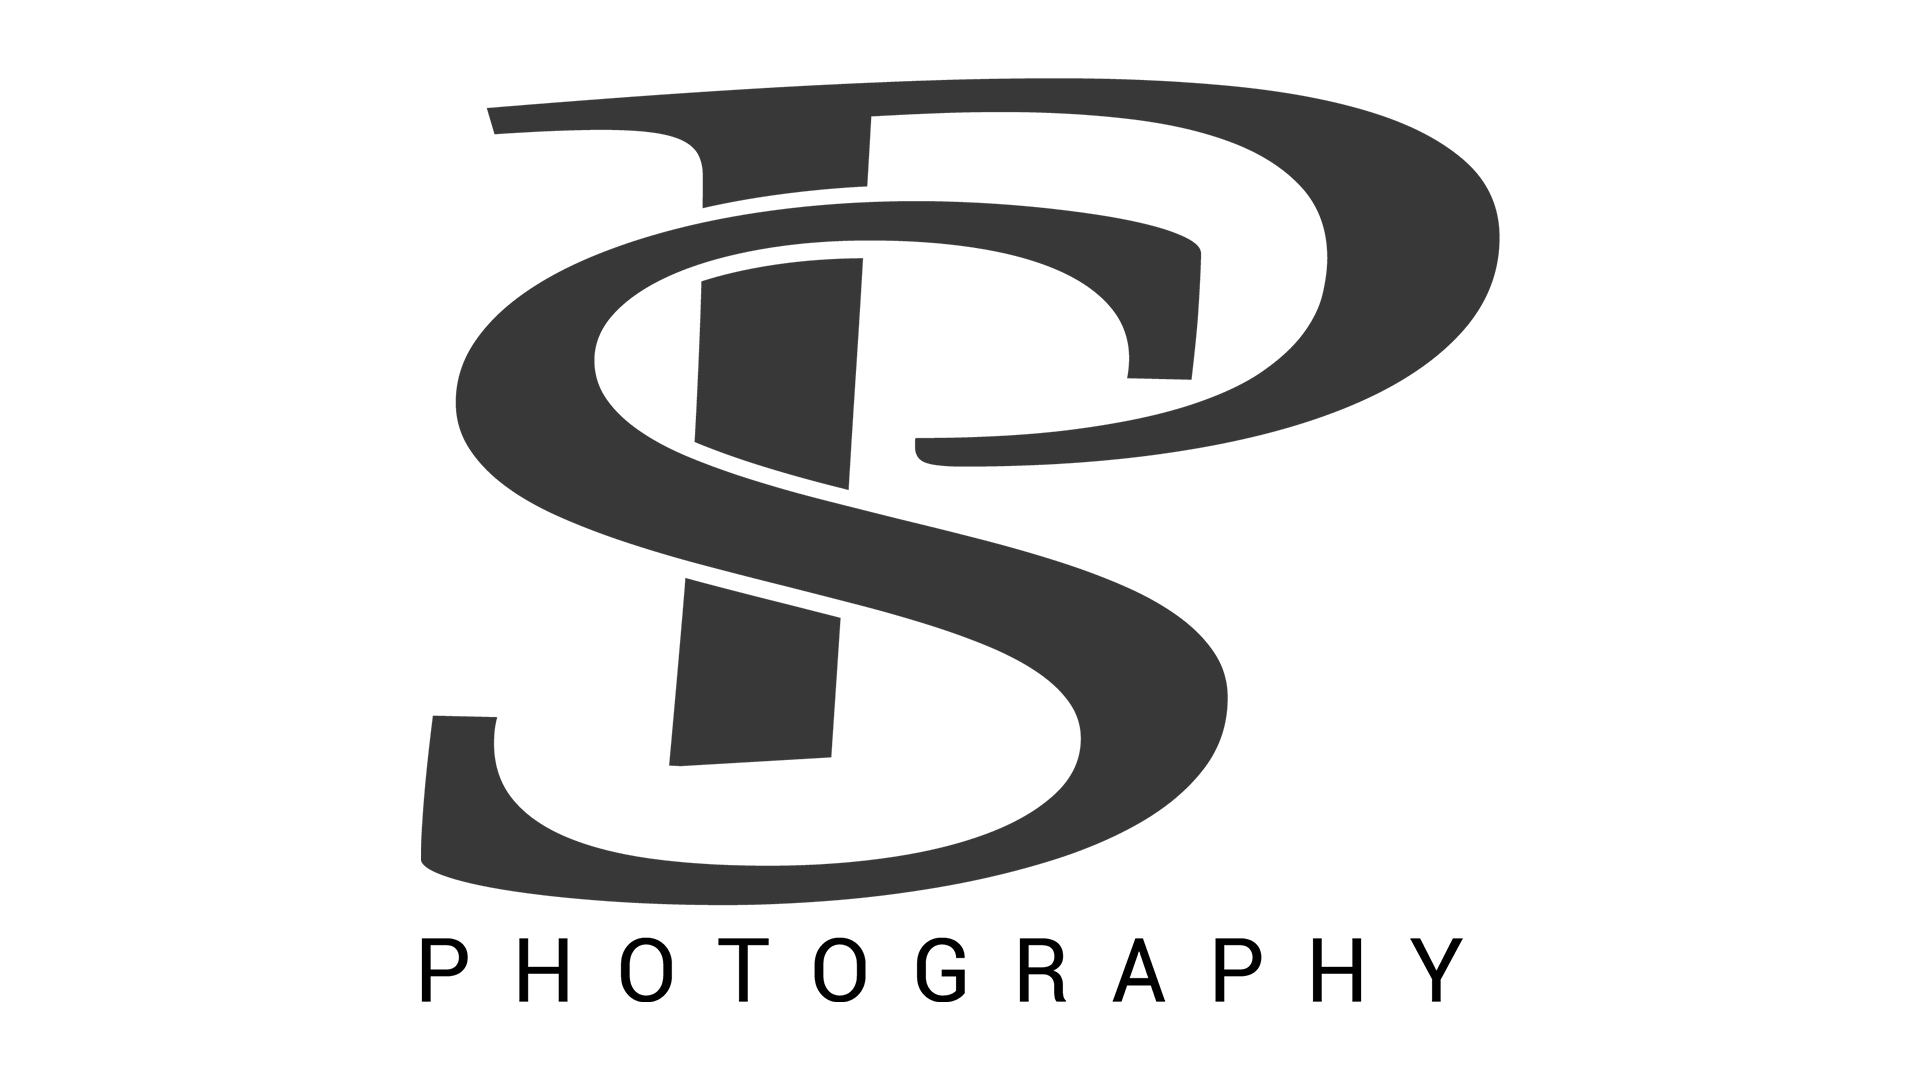 Photography Logo Wallpapers - Top Free Photography Logo Backgrounds ...